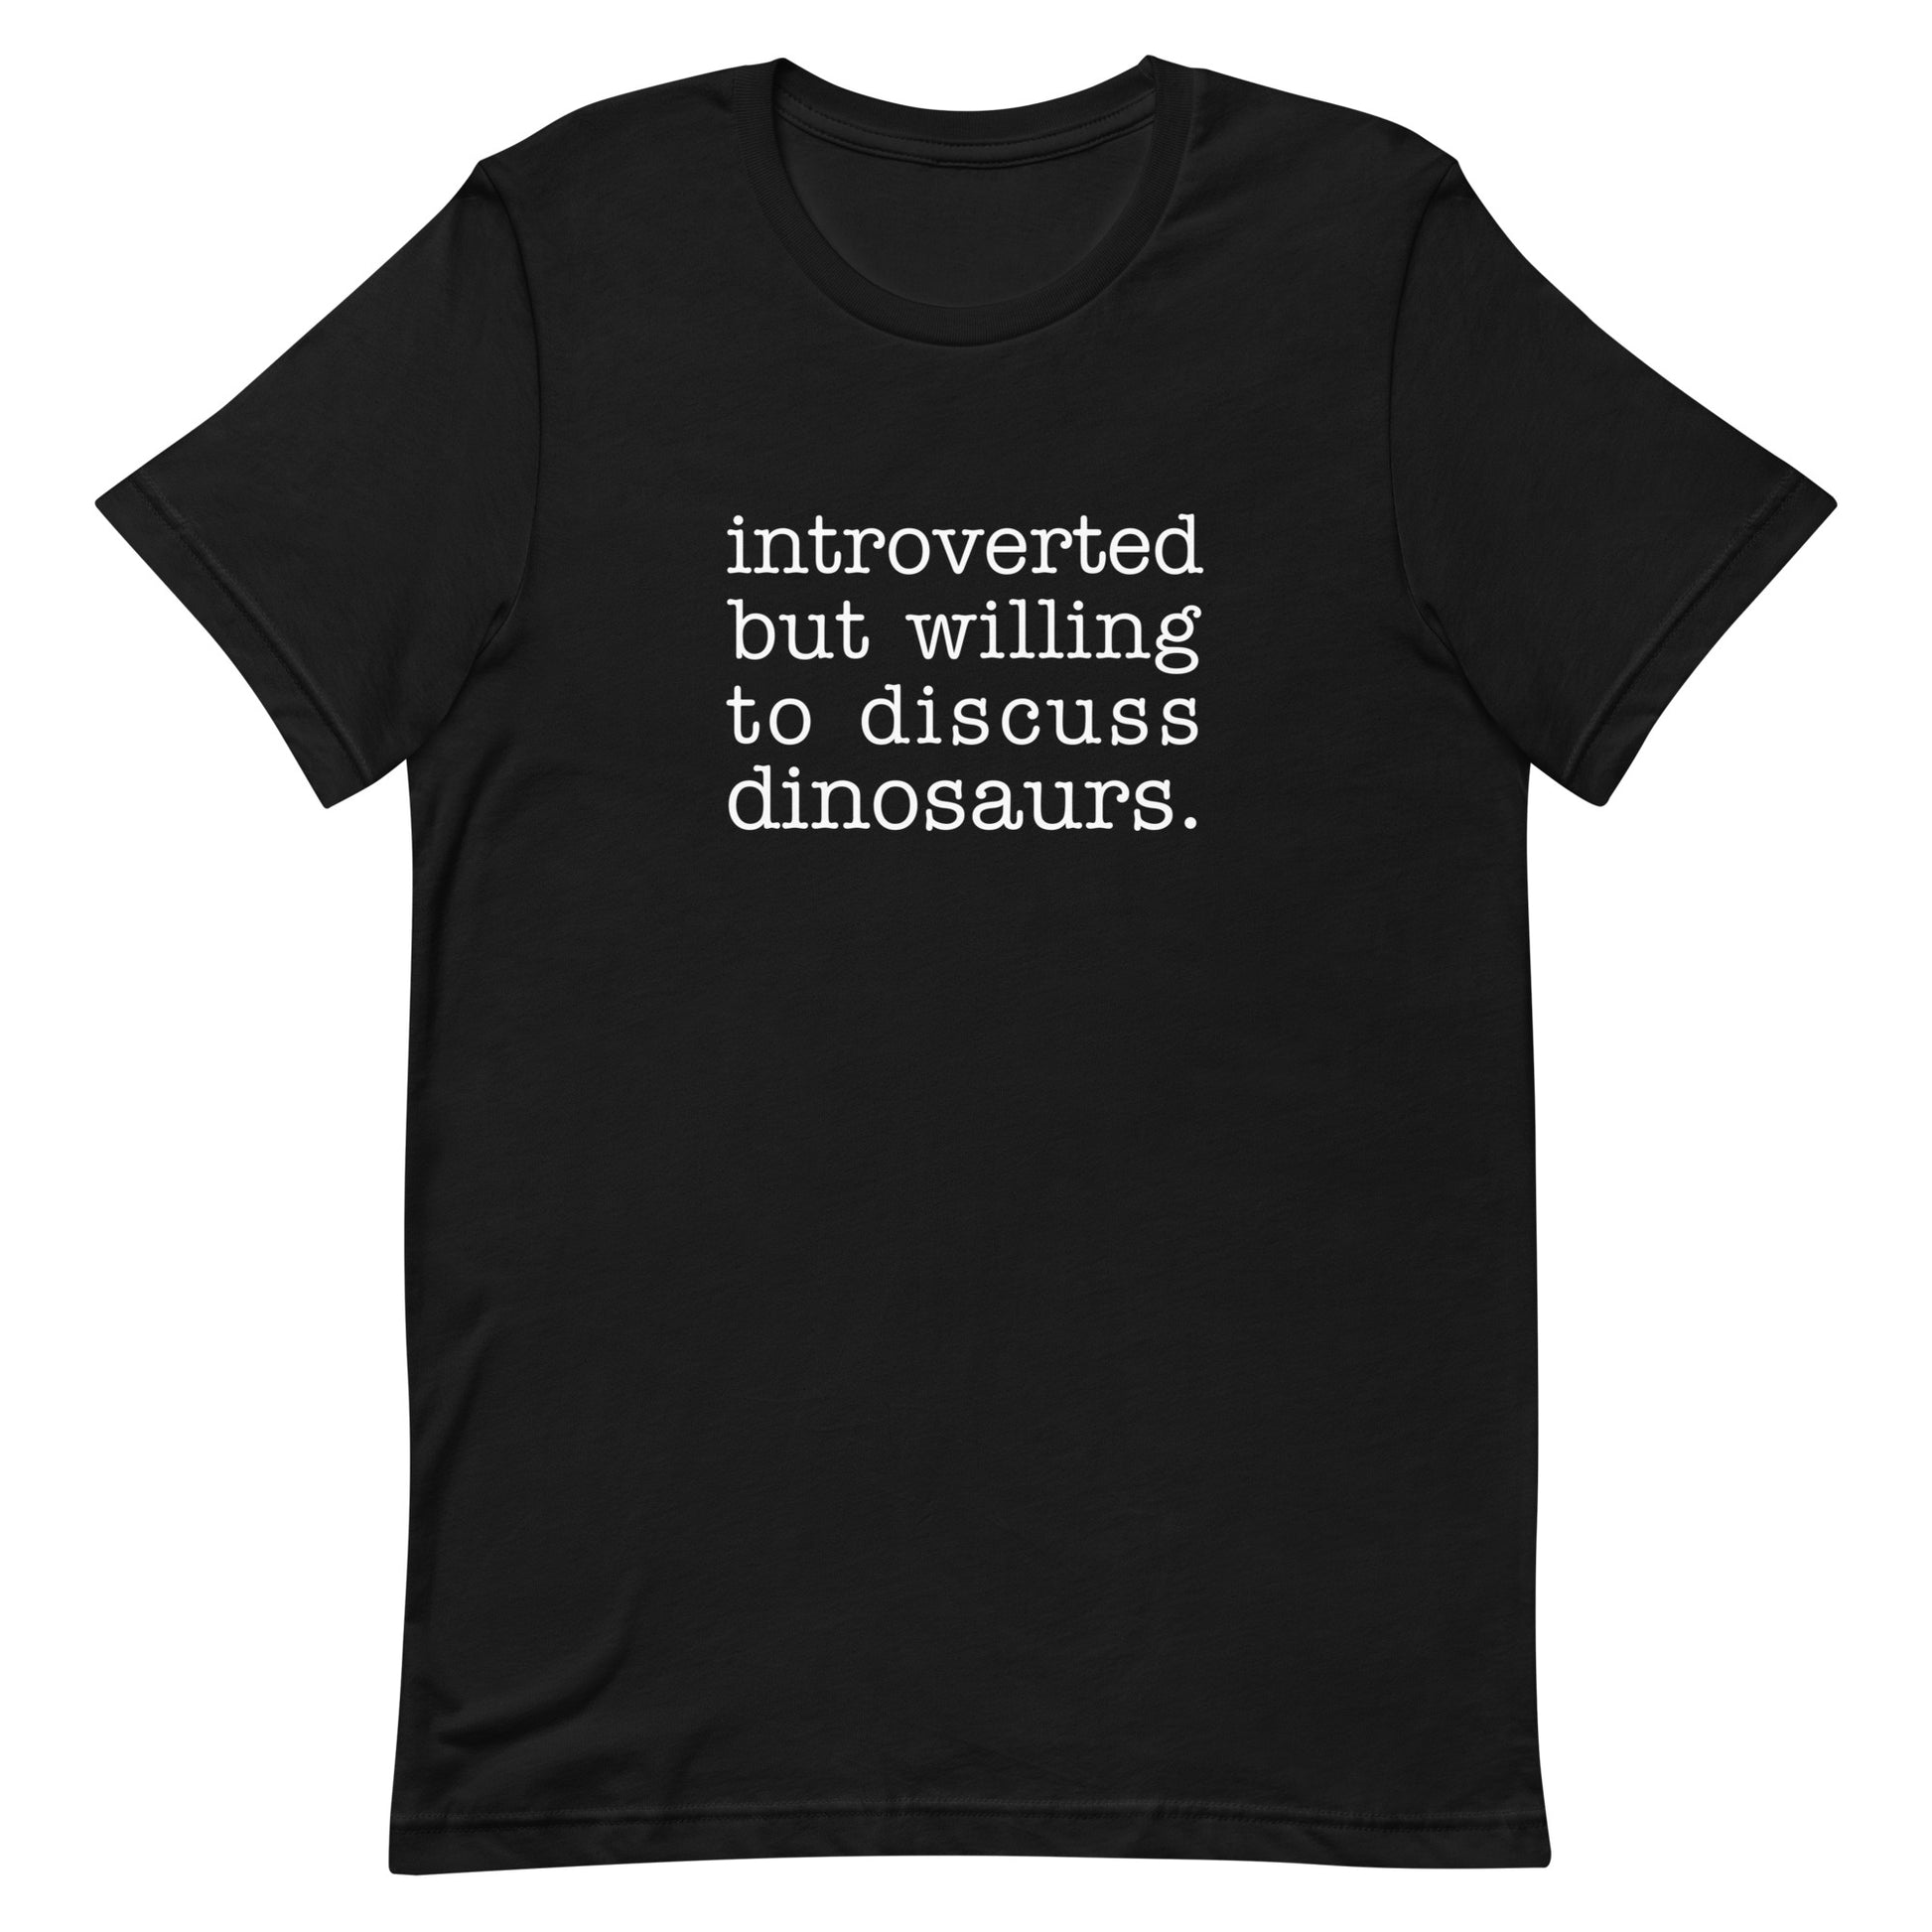 A black crewneck t-shirt with white text reading "introverted but willing to discuss dinosaurs"